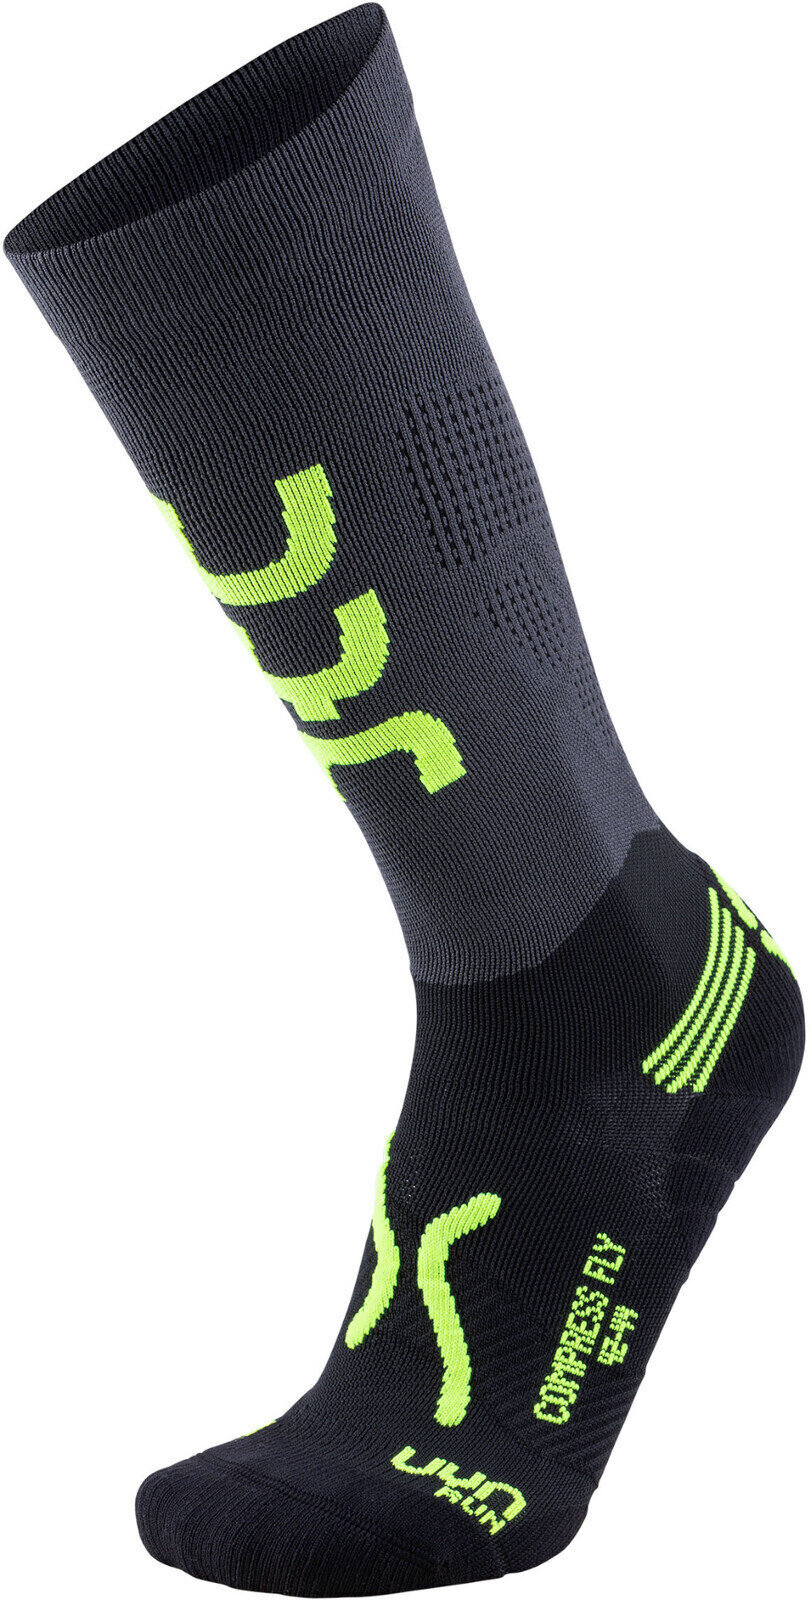 Chaussettes de course
 UYN Run Compression Fly Anthracite-Yellow Fluo 42/44 Chaussettes de course